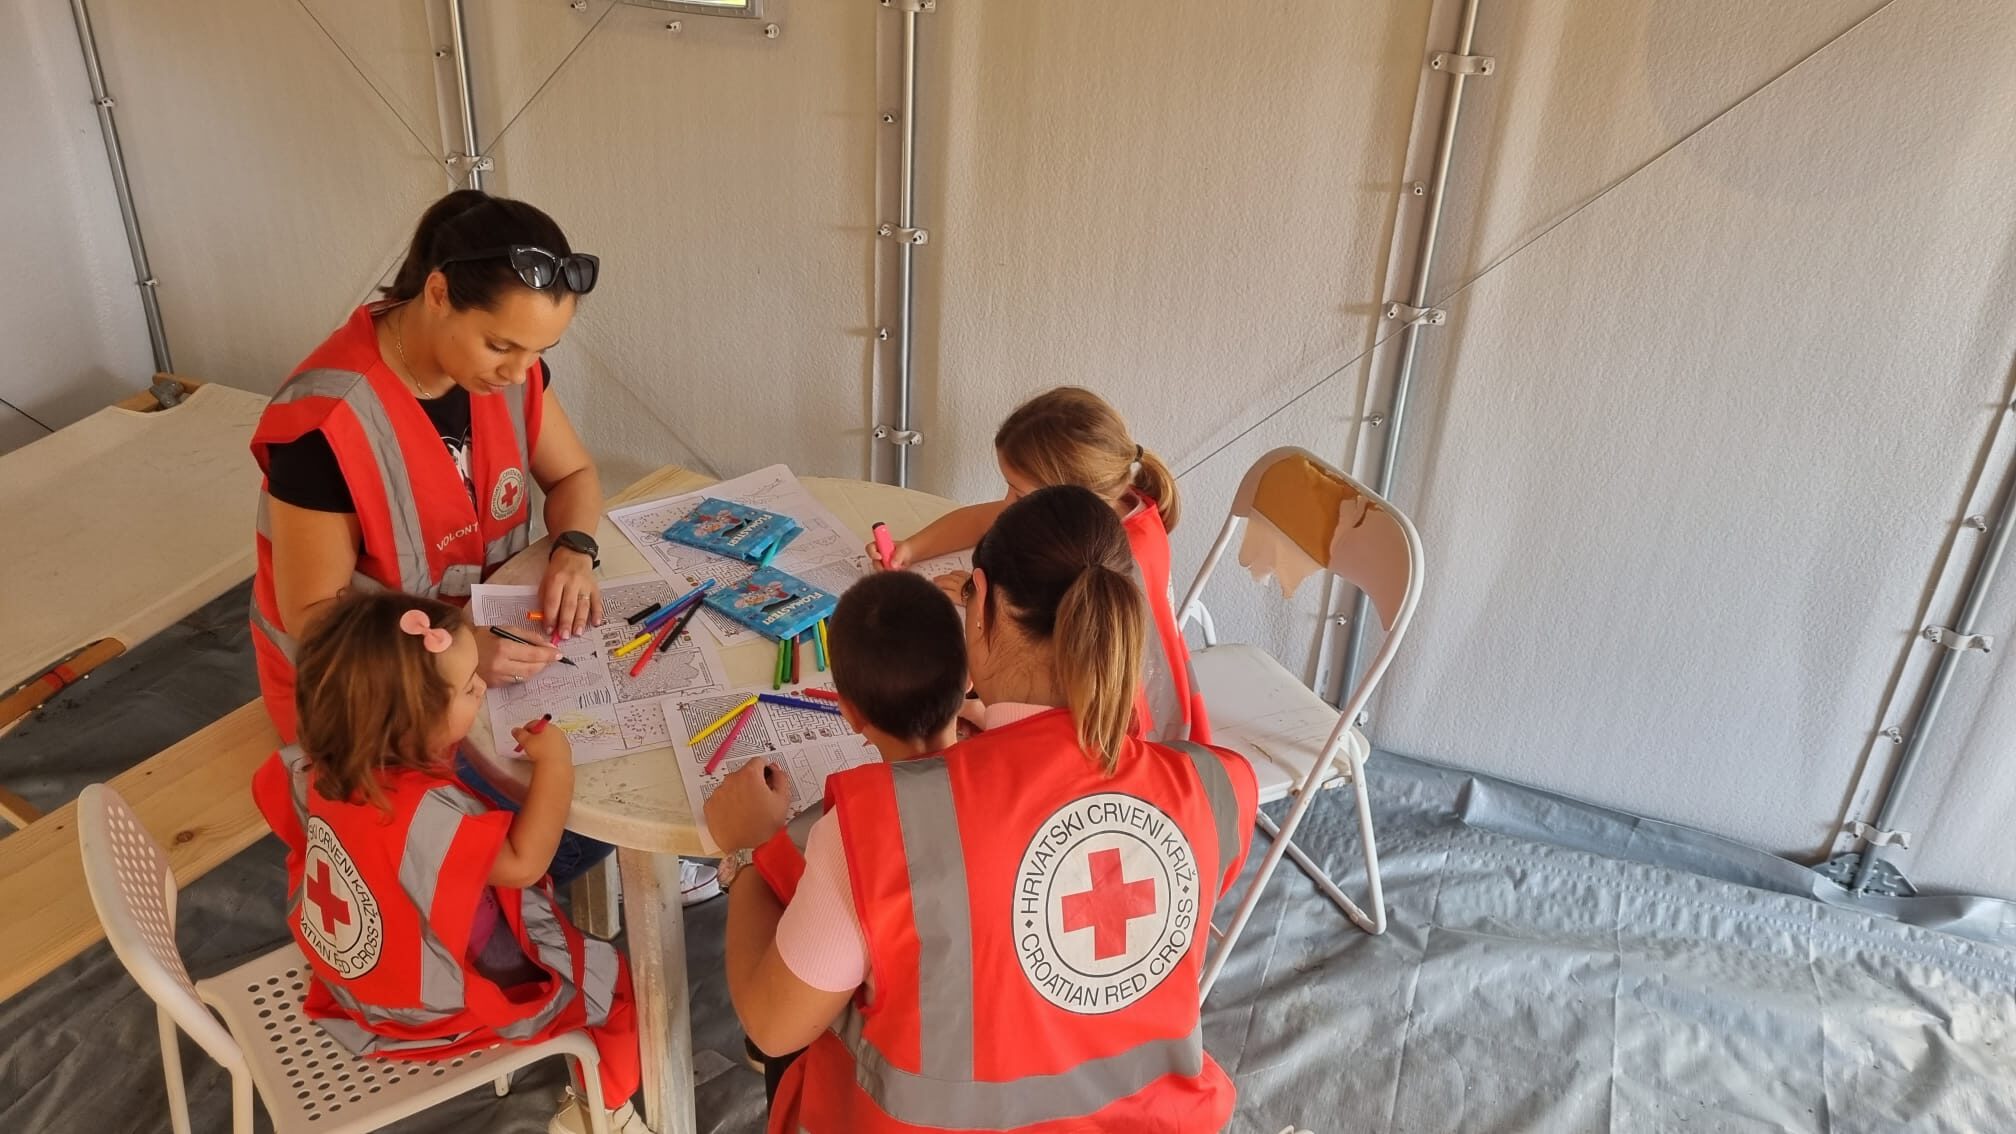 Providing safety and dignity to vulnerable children in Croatia through shelter